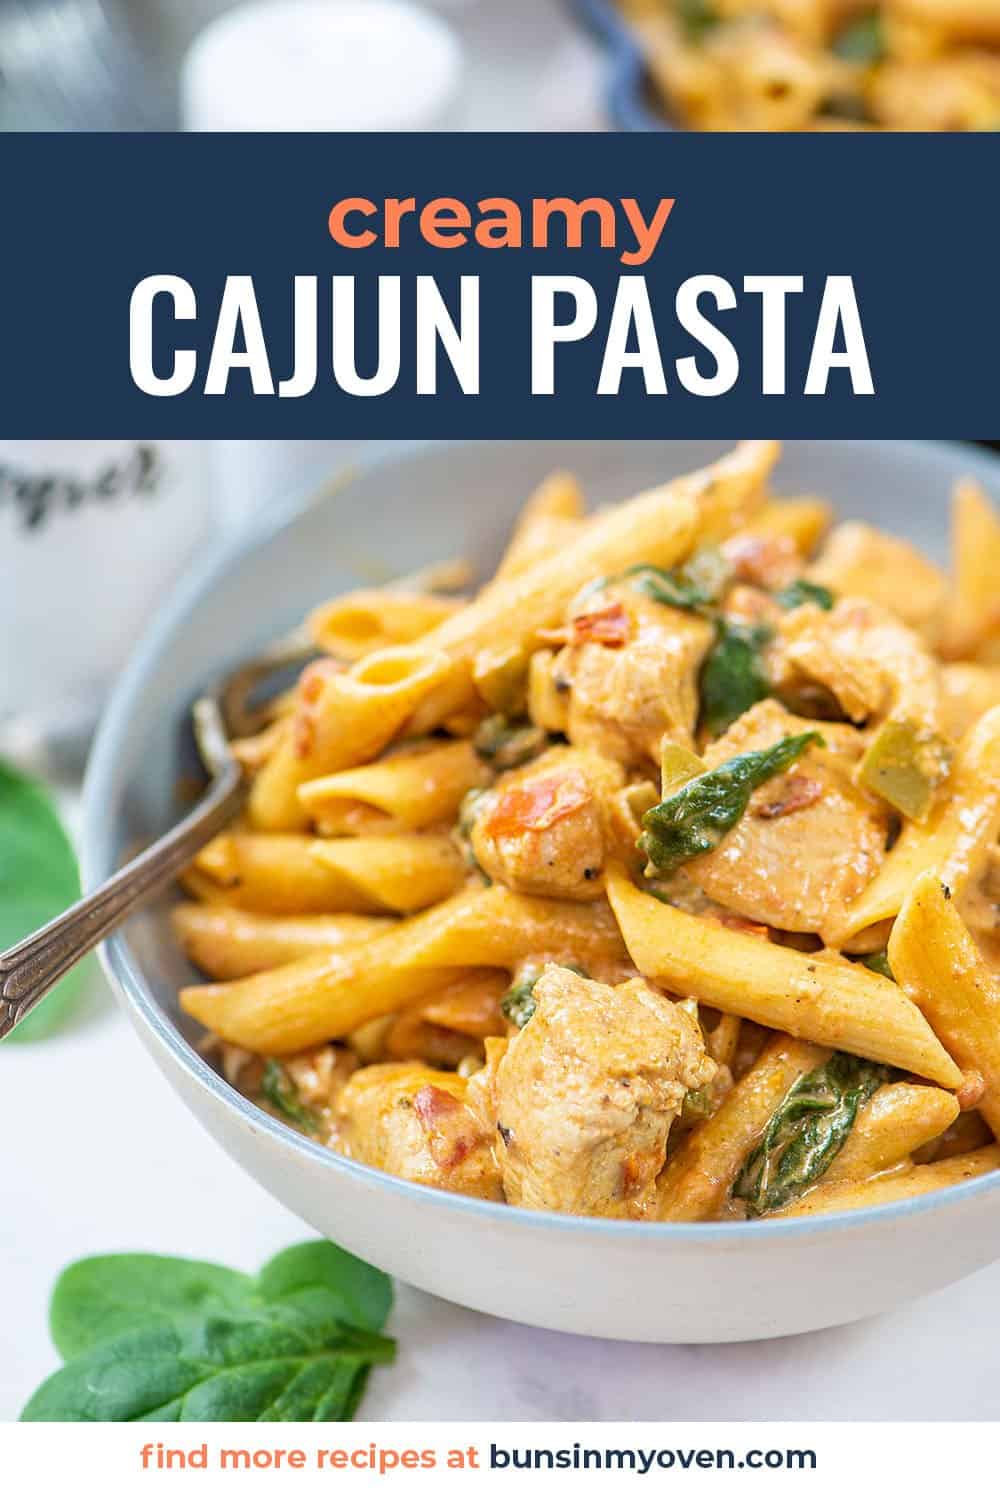 creamy Cajun pasta in bowl with text for Pinterest.